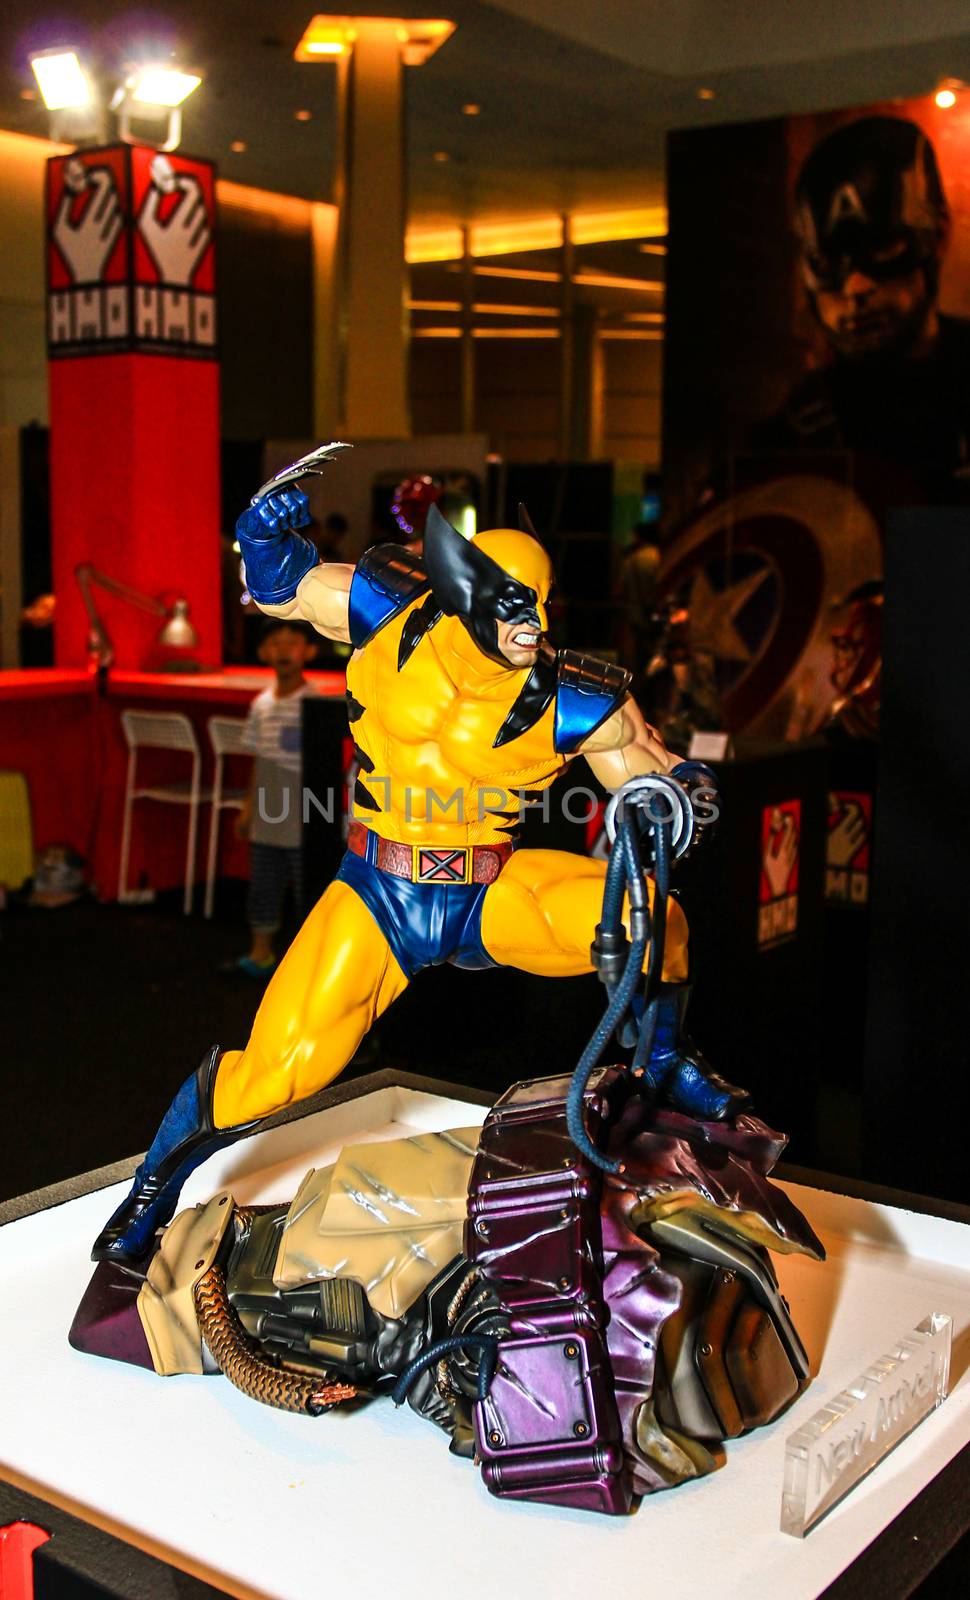 A model of the character Wolverine from the movies and comics by redthirteen